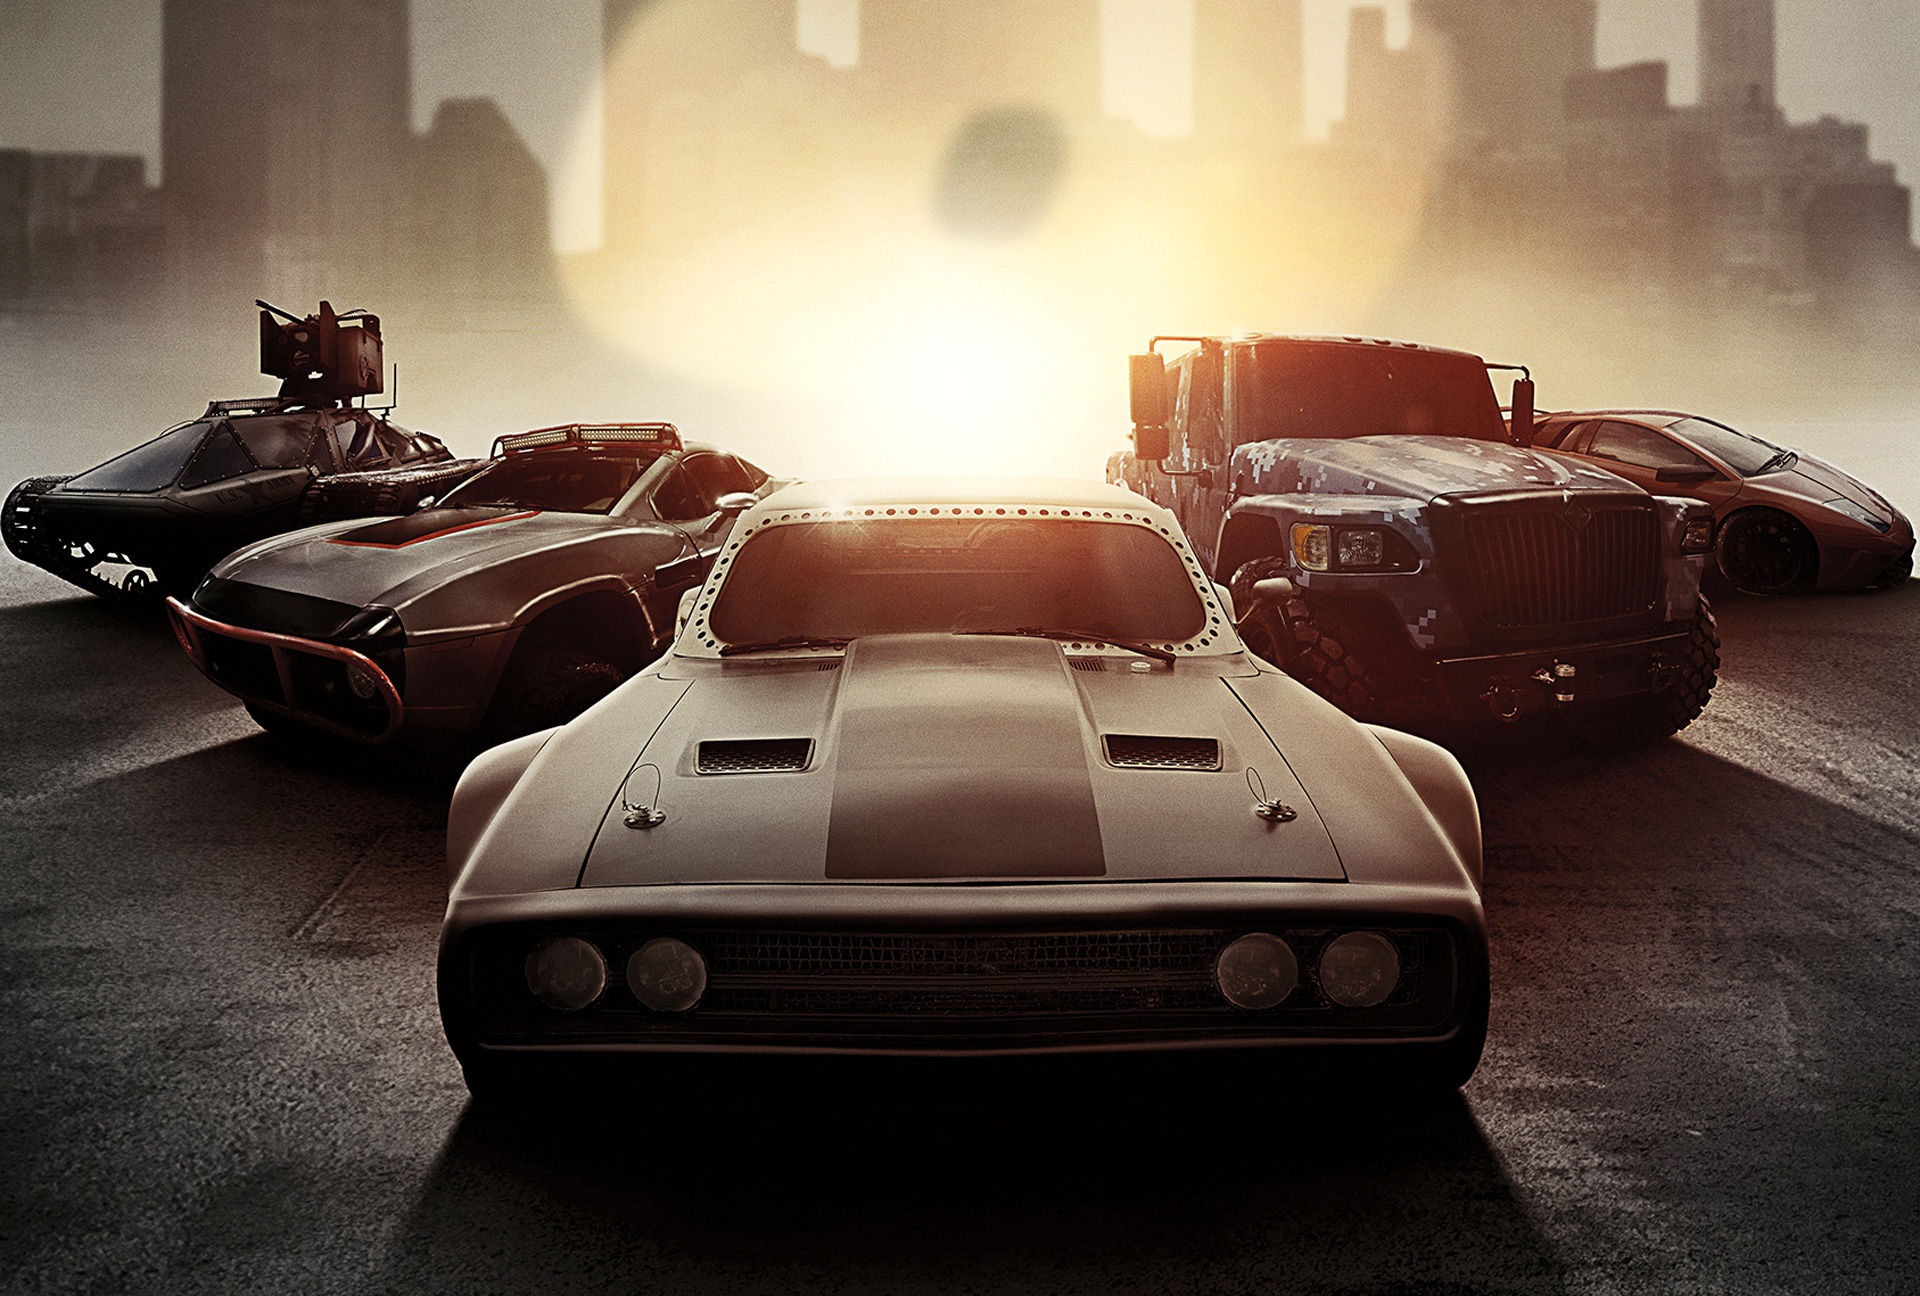 The Fate of The Furious HD Wallpaper | Background Image | 1920x1296 | ID:816872 ...1920 x 1296